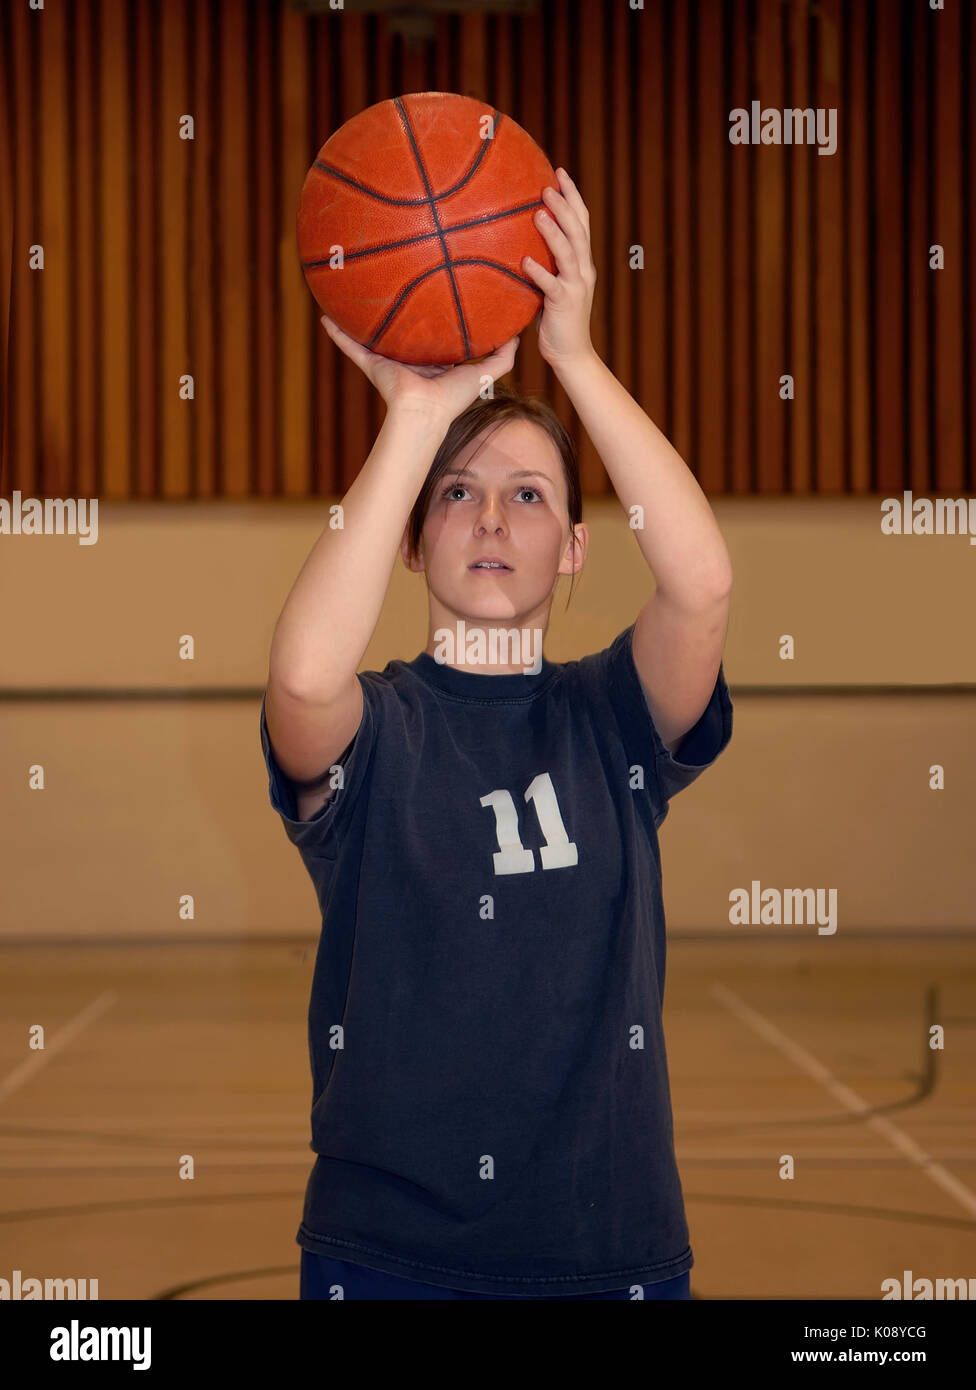 A young woman shoots a basketball in a gym. Stock Photo